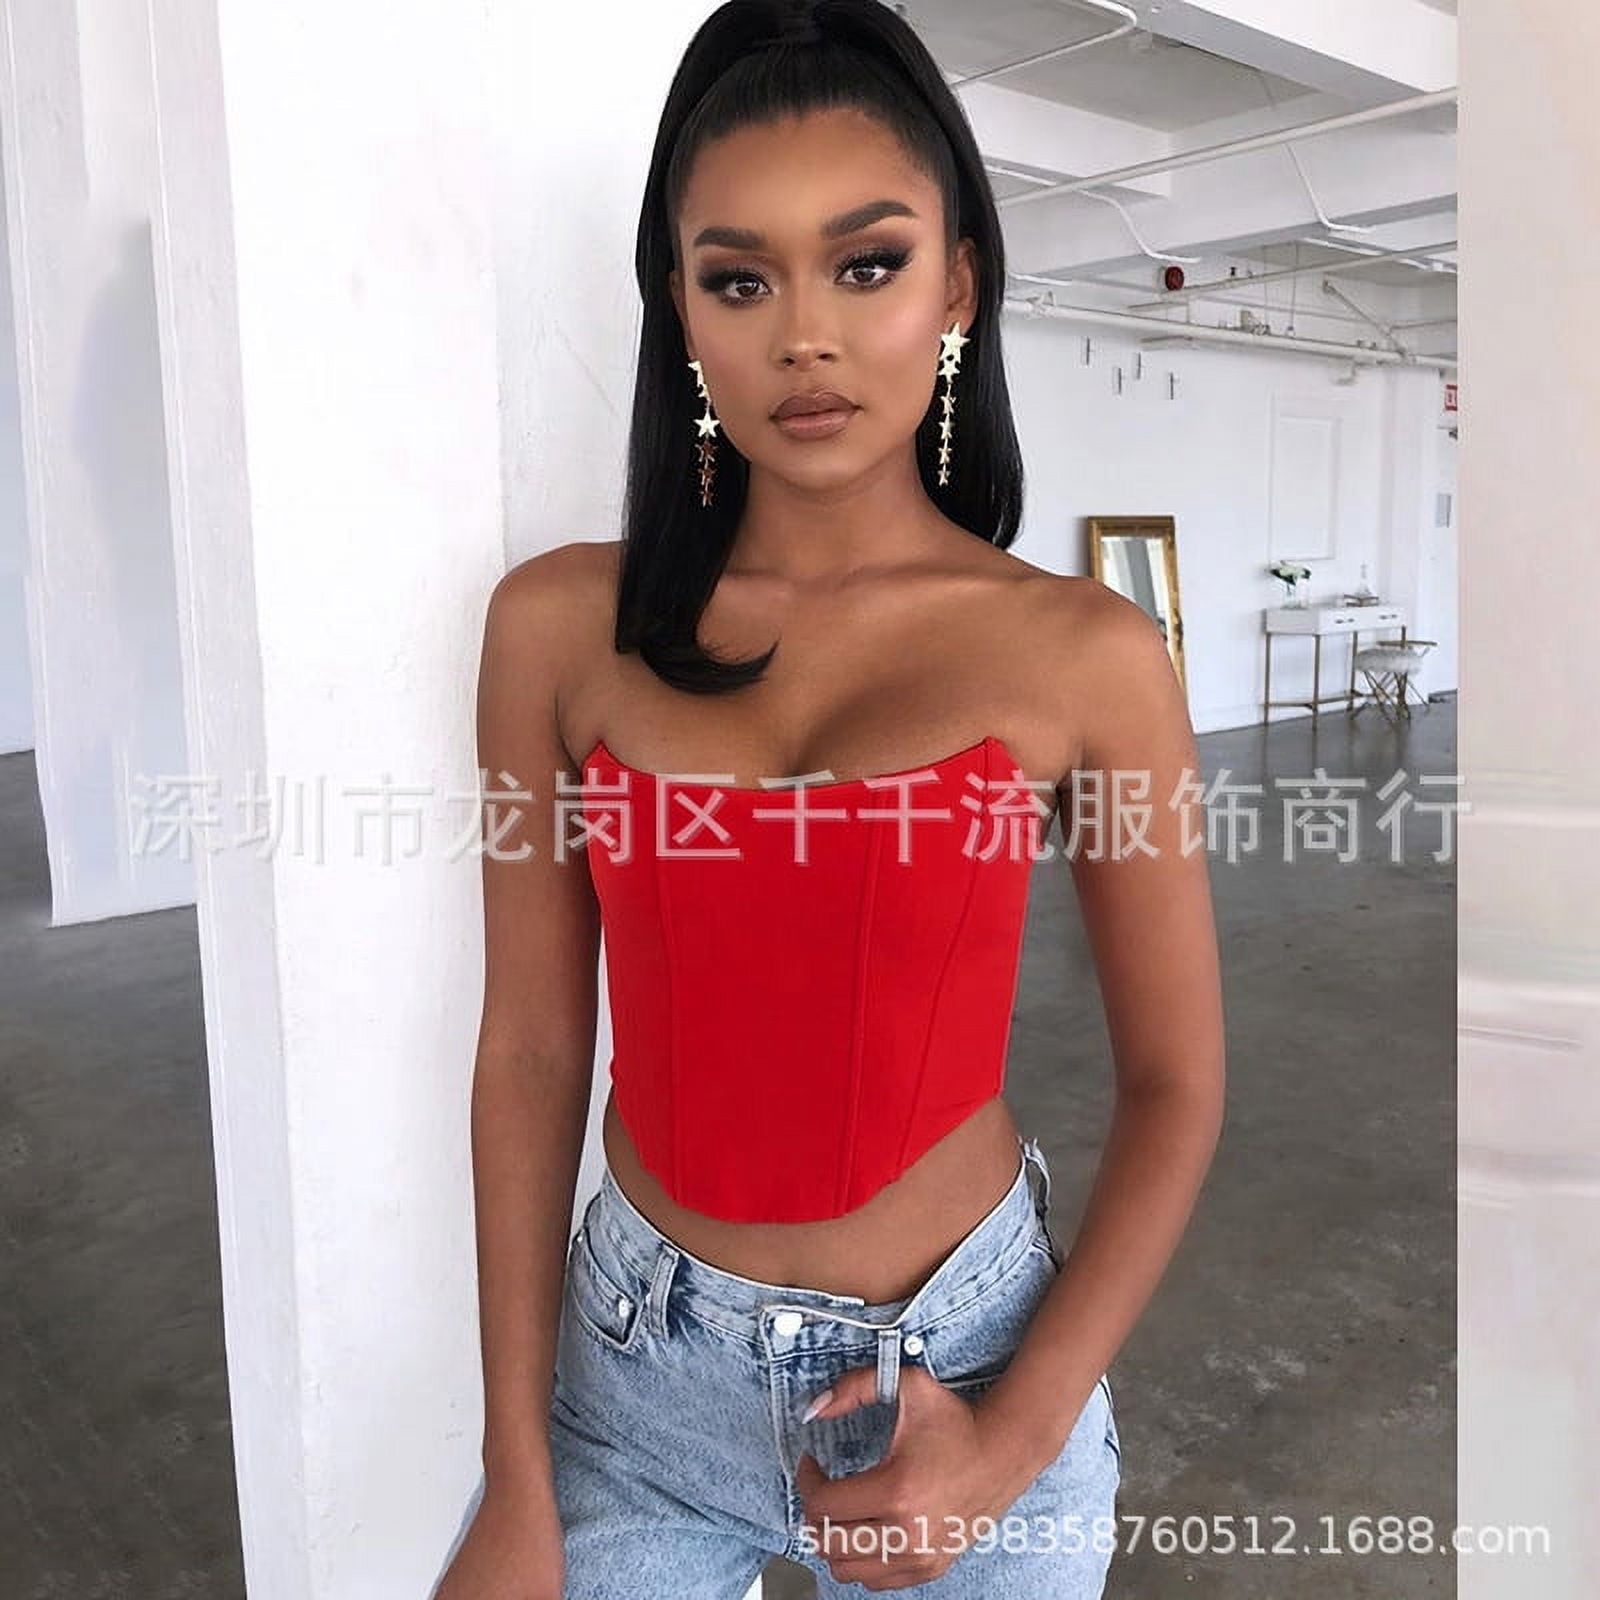 Women Tube Top Strapless Crop Top Sleeveless Bandeau Top Outfit Girl Tube  Top for Summer 